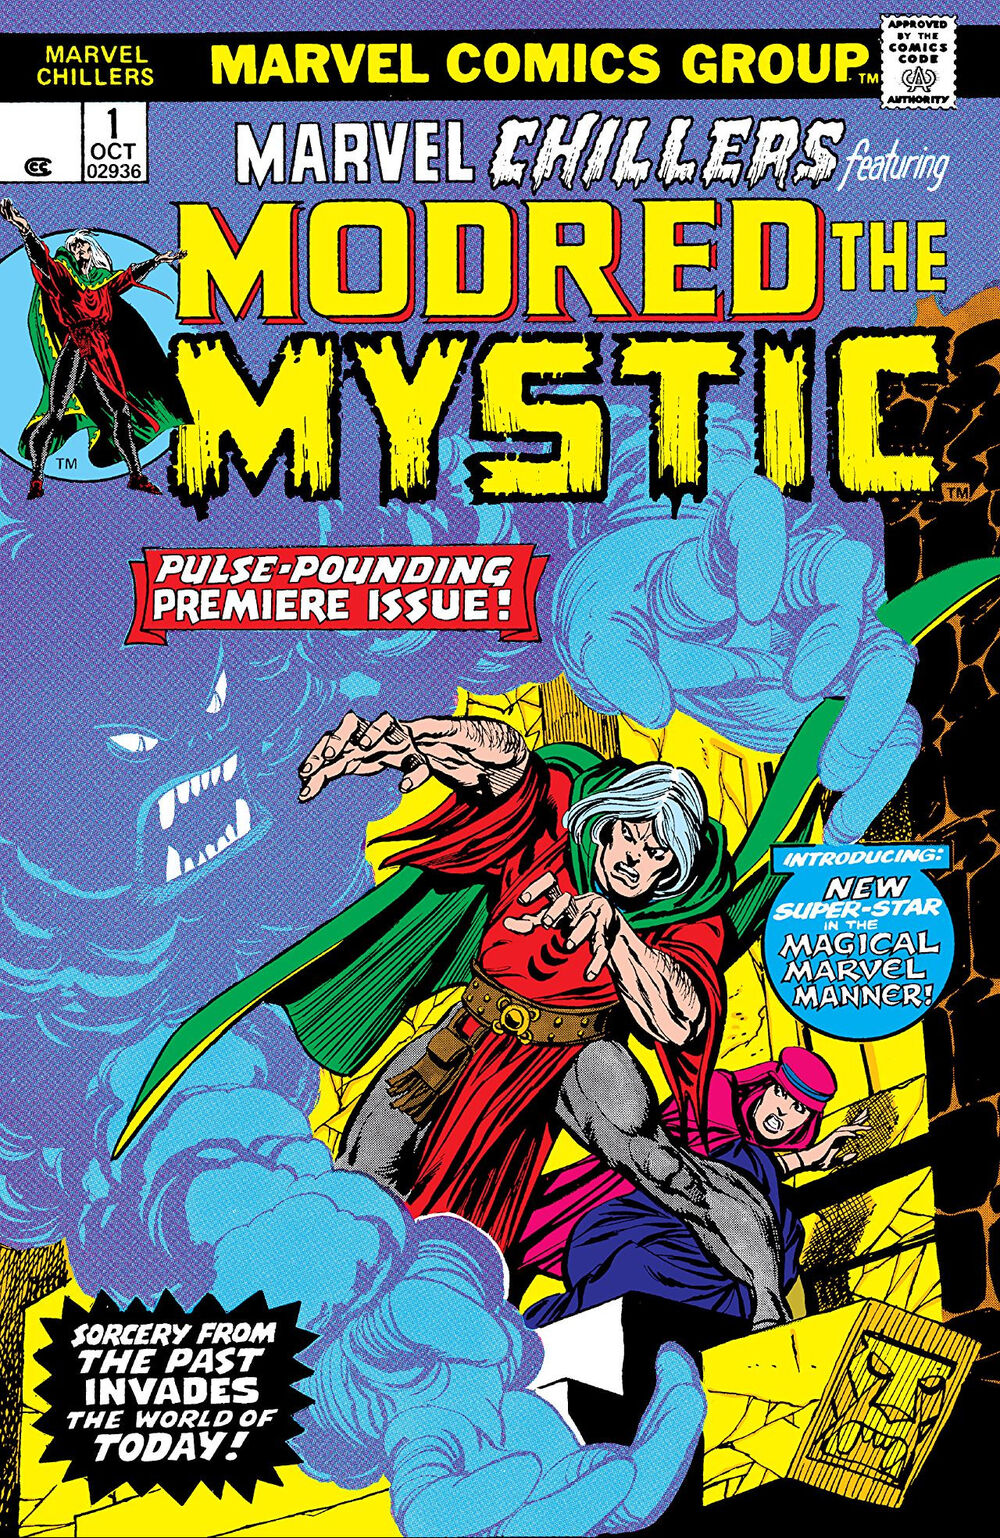 Marvel Chillers Featuring Modred The Mystic Volume 1 #1